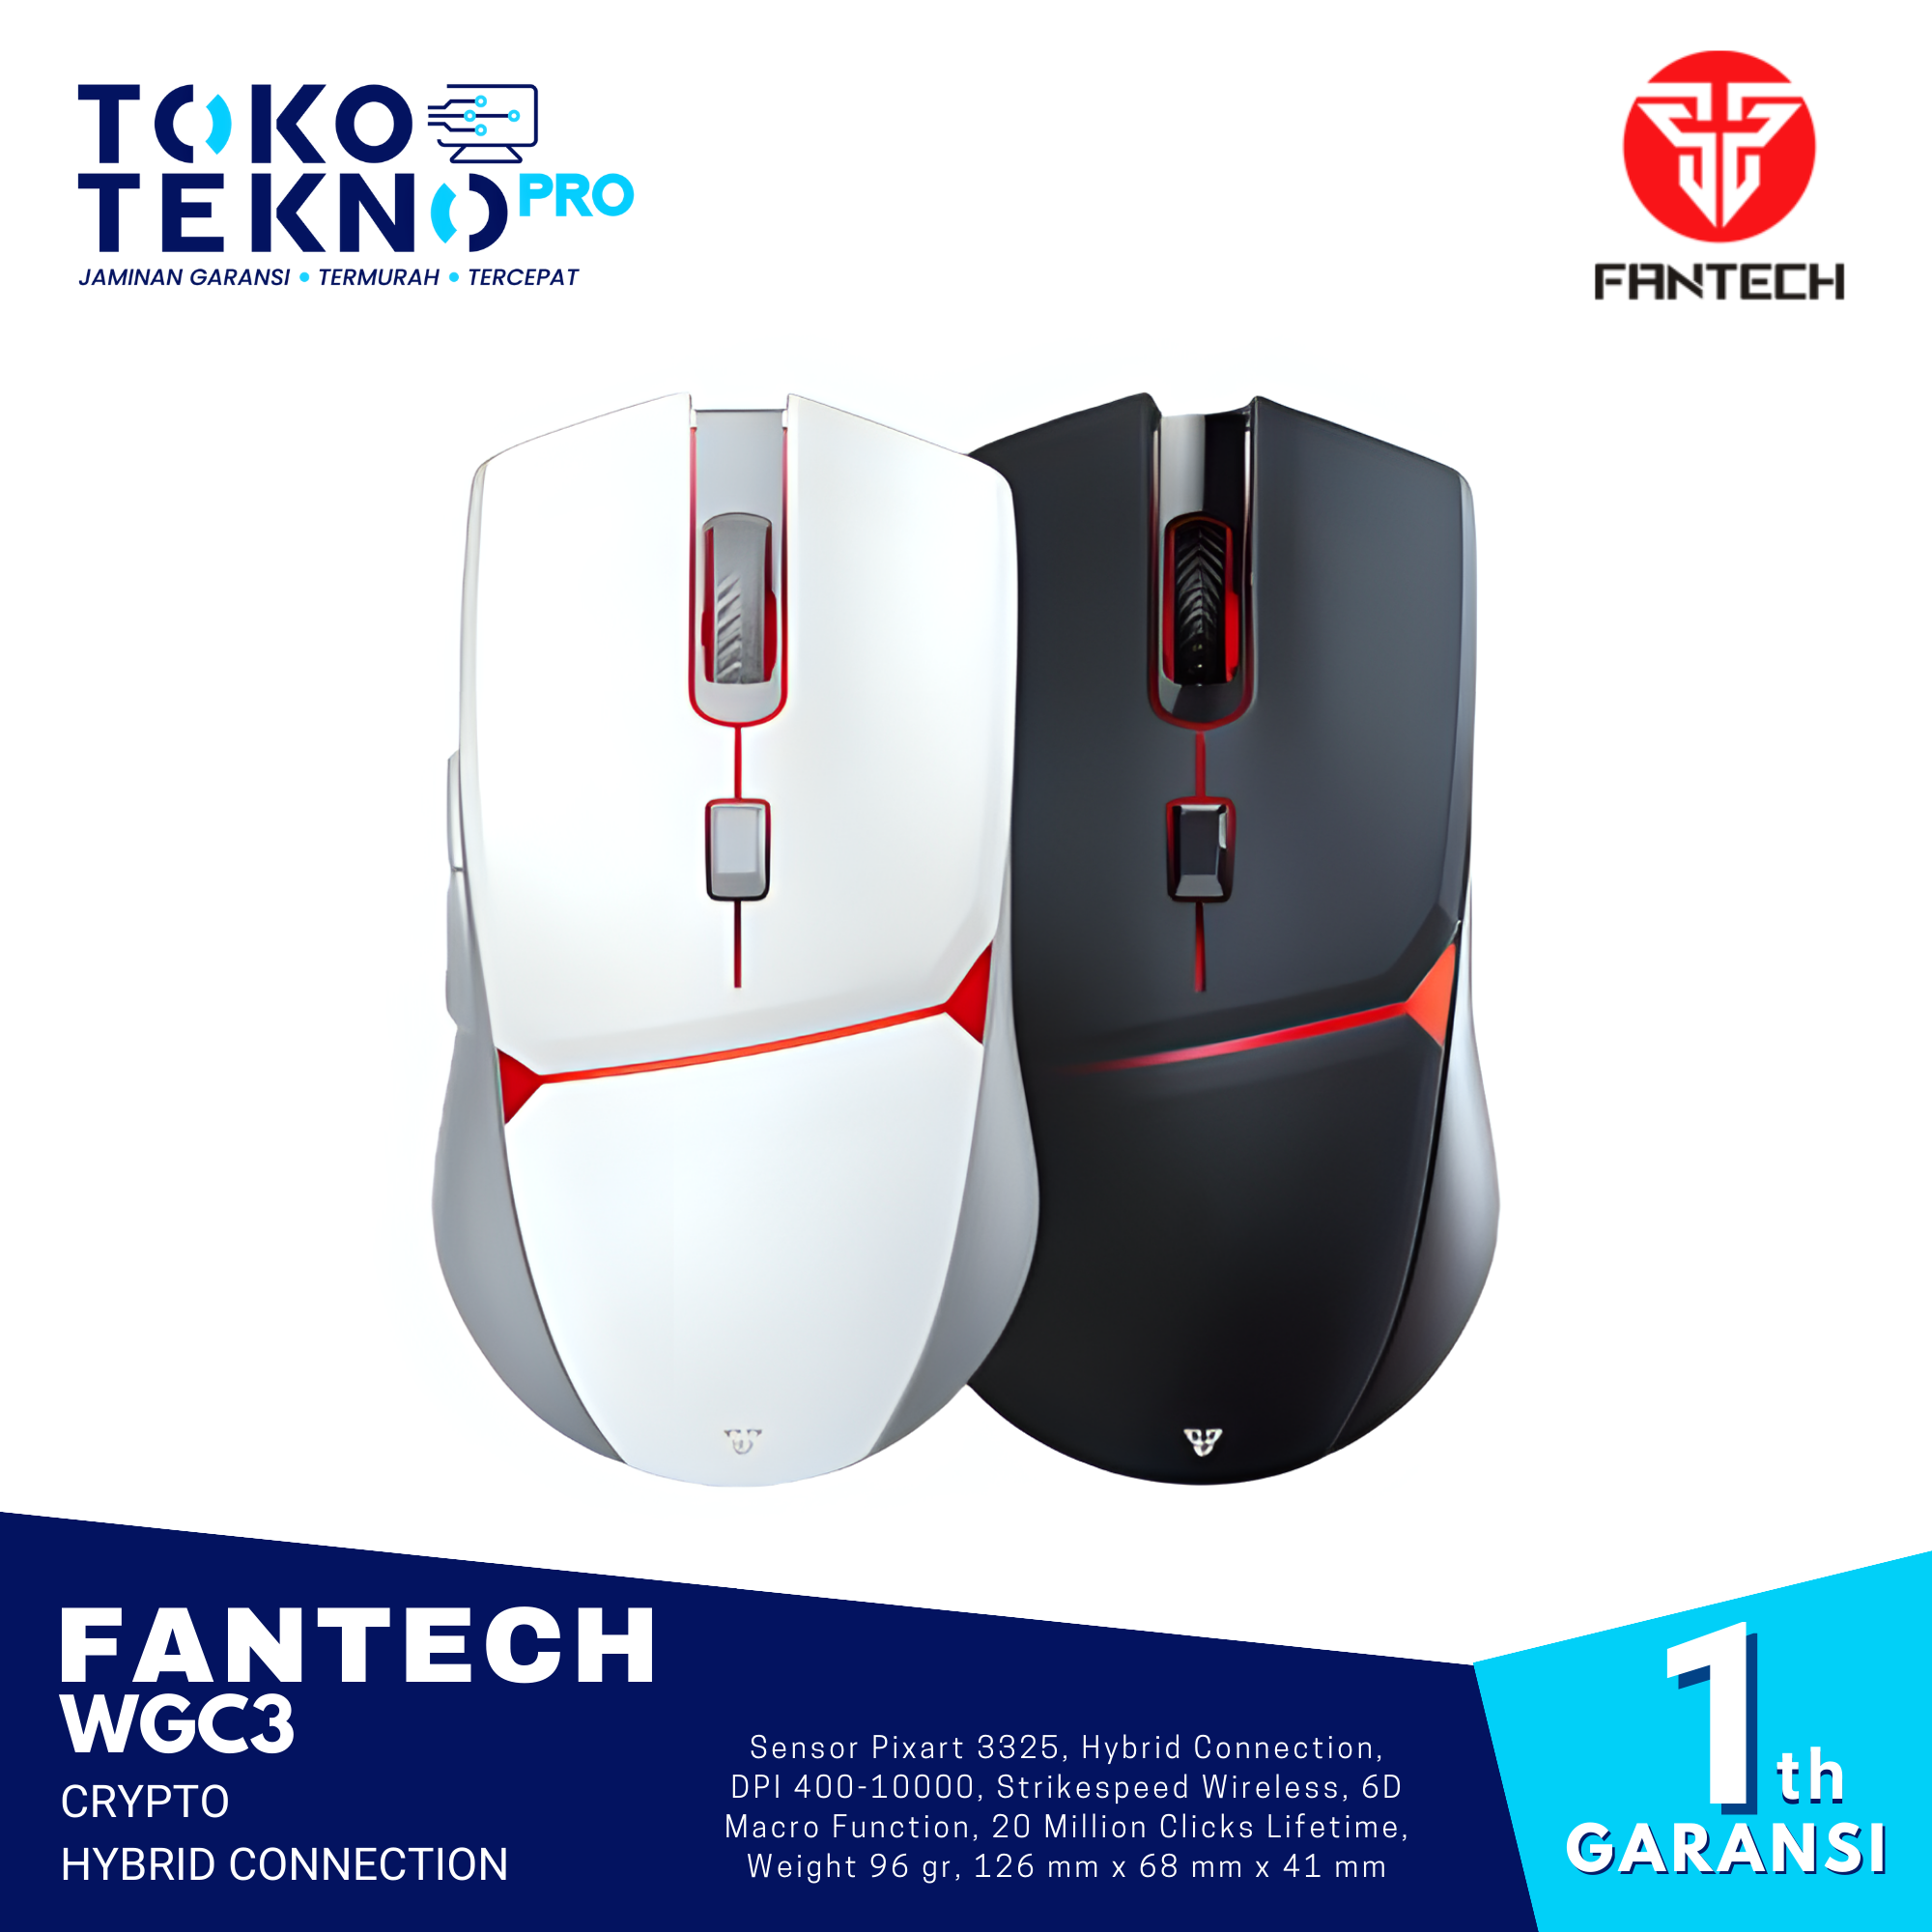 Fantech WGC3 Crypto Hybrid Connection Wireless Gaming Mouse